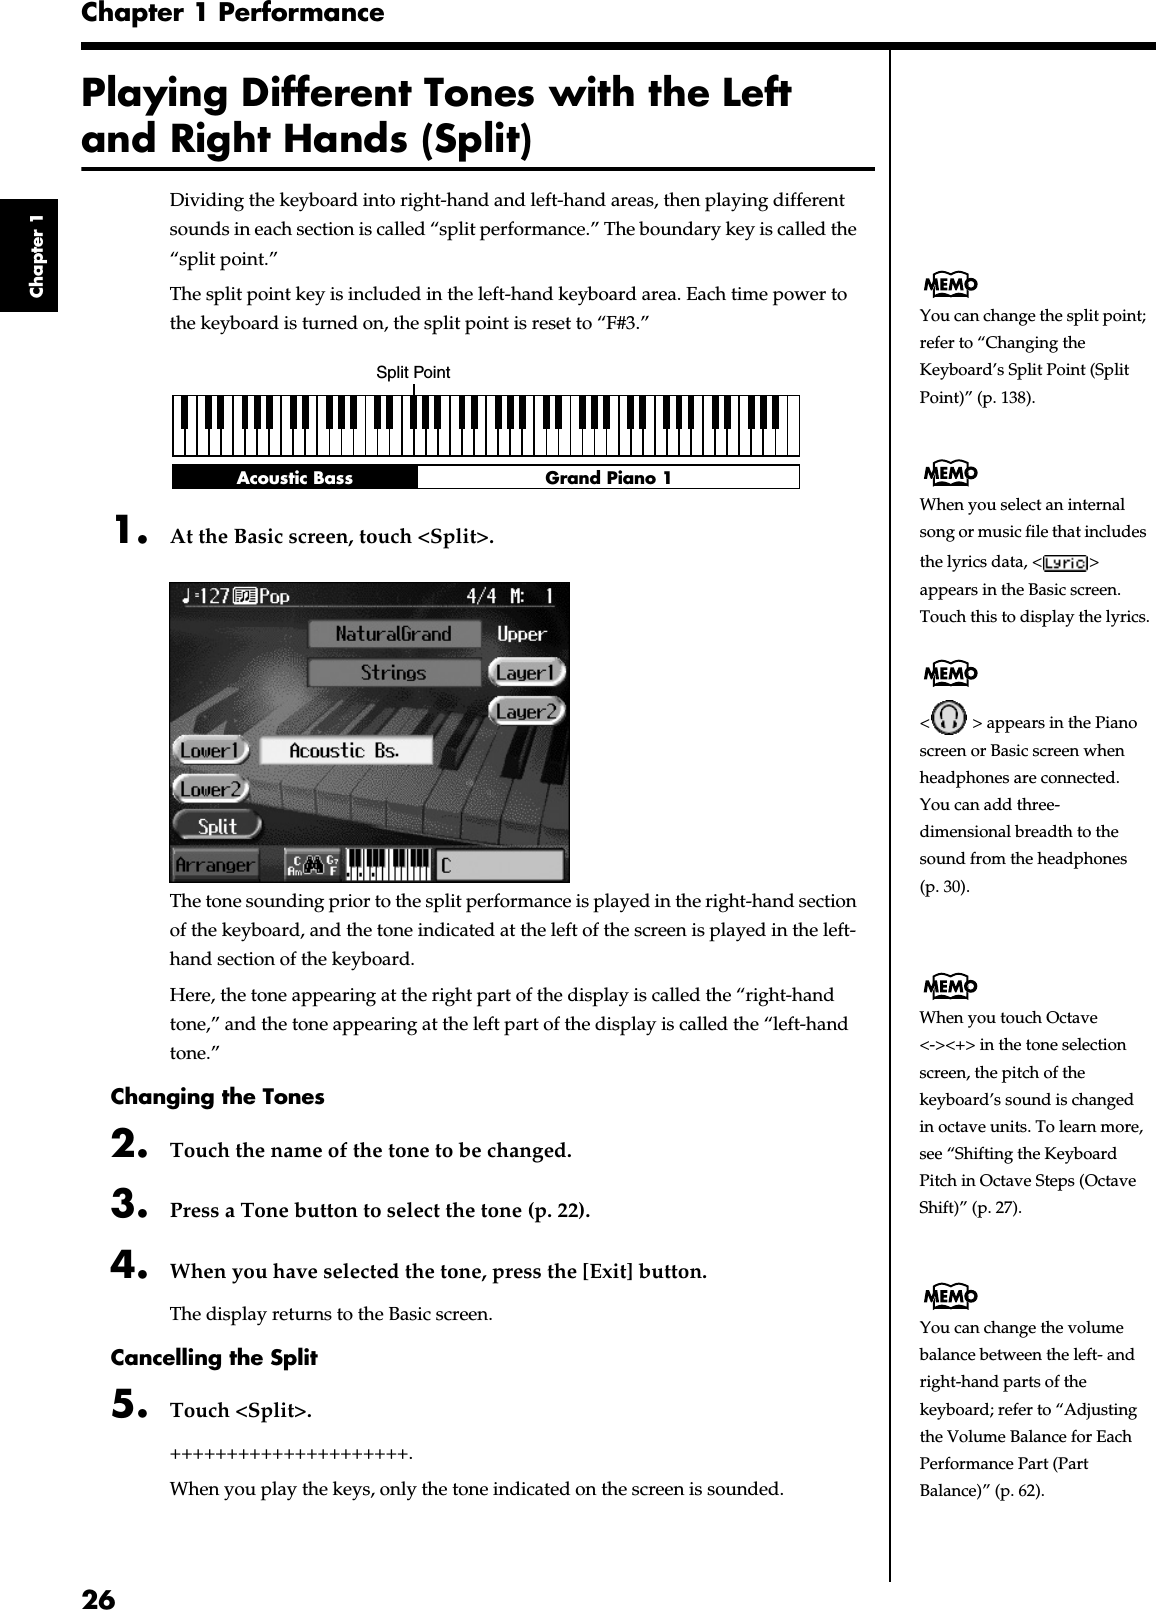 26Chapter 1 PerformanceChapter 1Playing Different Tones with the Left and Right Hands (Split)Dividing the keyboard into right-hand and left-hand areas, then playing different sounds in each section is called “split performance.” The boundary key is called the “split point.”The split point key is included in the left-hand keyboard area. Each time power to the keyboard is turned on, the split point is reset to “F#3.”fig.split.e1. At the Basic screen, touch &lt;Split&gt;.fig.d-split.eps_60The tone sounding prior to the split performance is played in the right-hand section of the keyboard, and the tone indicated at the left of the screen is played in the left-hand section of the keyboard.Here, the tone appearing at the right part of the display is called the “right-hand tone,” and the tone appearing at the left part of the display is called the “left-hand tone.”Changing the Tones2. Touch the name of the tone to be changed.3. Press a Tone button to select the tone (p. 22).4. When you have selected the tone, press the [Exit] button.The display returns to the Basic screen.Cancelling the Split5. Touch &lt;Split&gt;.+++++++++++++++++++++.When you play the keys, only the tone indicated on the screen is sounded.Split PointGrand Piano 1Acoustic BassYou can change the split point; refer to “Changing the Keyboard’s Split Point (Split Point)” (p. 138).When you select an internal song or music file that includes the lyrics data, &lt; &gt; appears in the Basic screen. Touch this to display the lyrics.&lt;  &gt; appears in the Piano screen or Basic screen when headphones are connected.You can add three-dimensional breadth to the sound from the headphones (p. 30).When you touch Octave &lt;-&gt;&lt;+&gt; in the tone selection screen, the pitch of the keyboard’s sound is changed in octave units. To learn more, see “Shifting the Keyboard Pitch in Octave Steps (Octave Shift)” (p. 27).You can change the volume balance between the left- and right-hand parts of the keyboard; refer to “Adjusting the Volume Balance for Each Performance Part (Part Balance)” (p. 62).